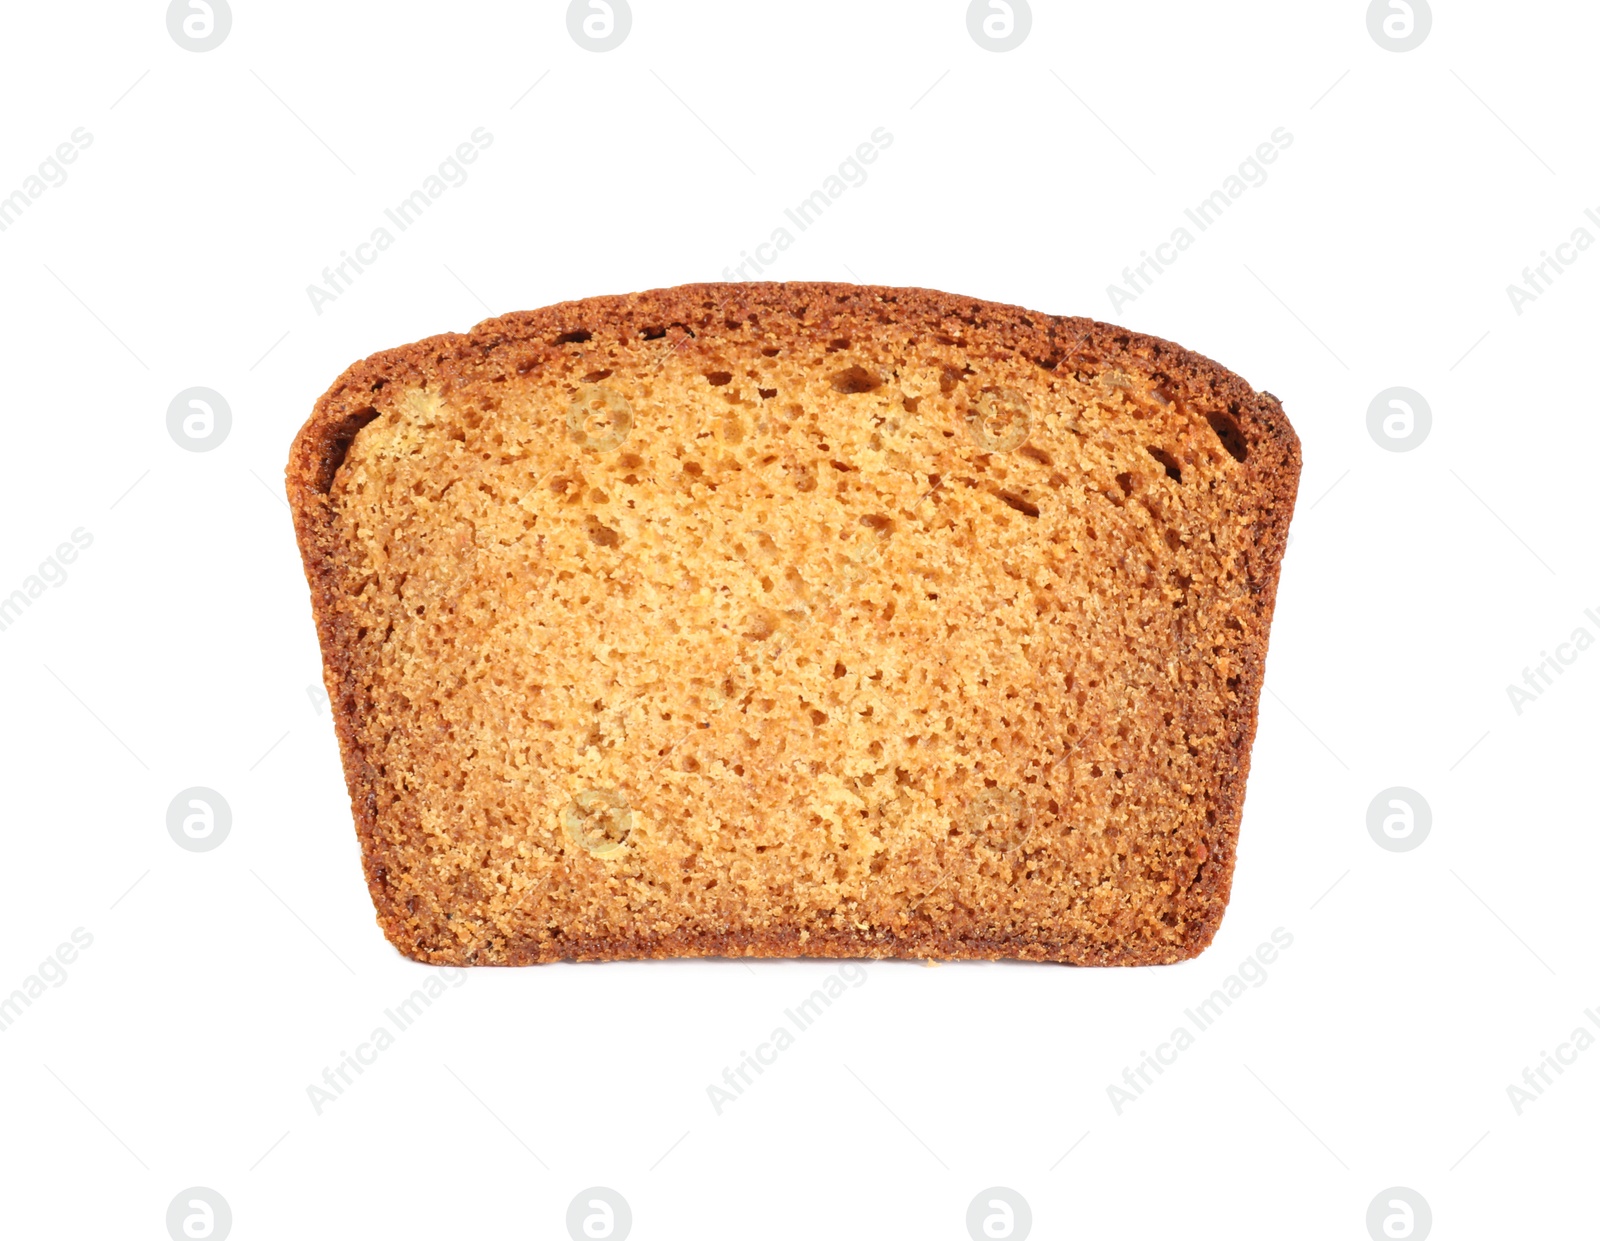 Photo of Piece of fresh gingerbread cake on white background